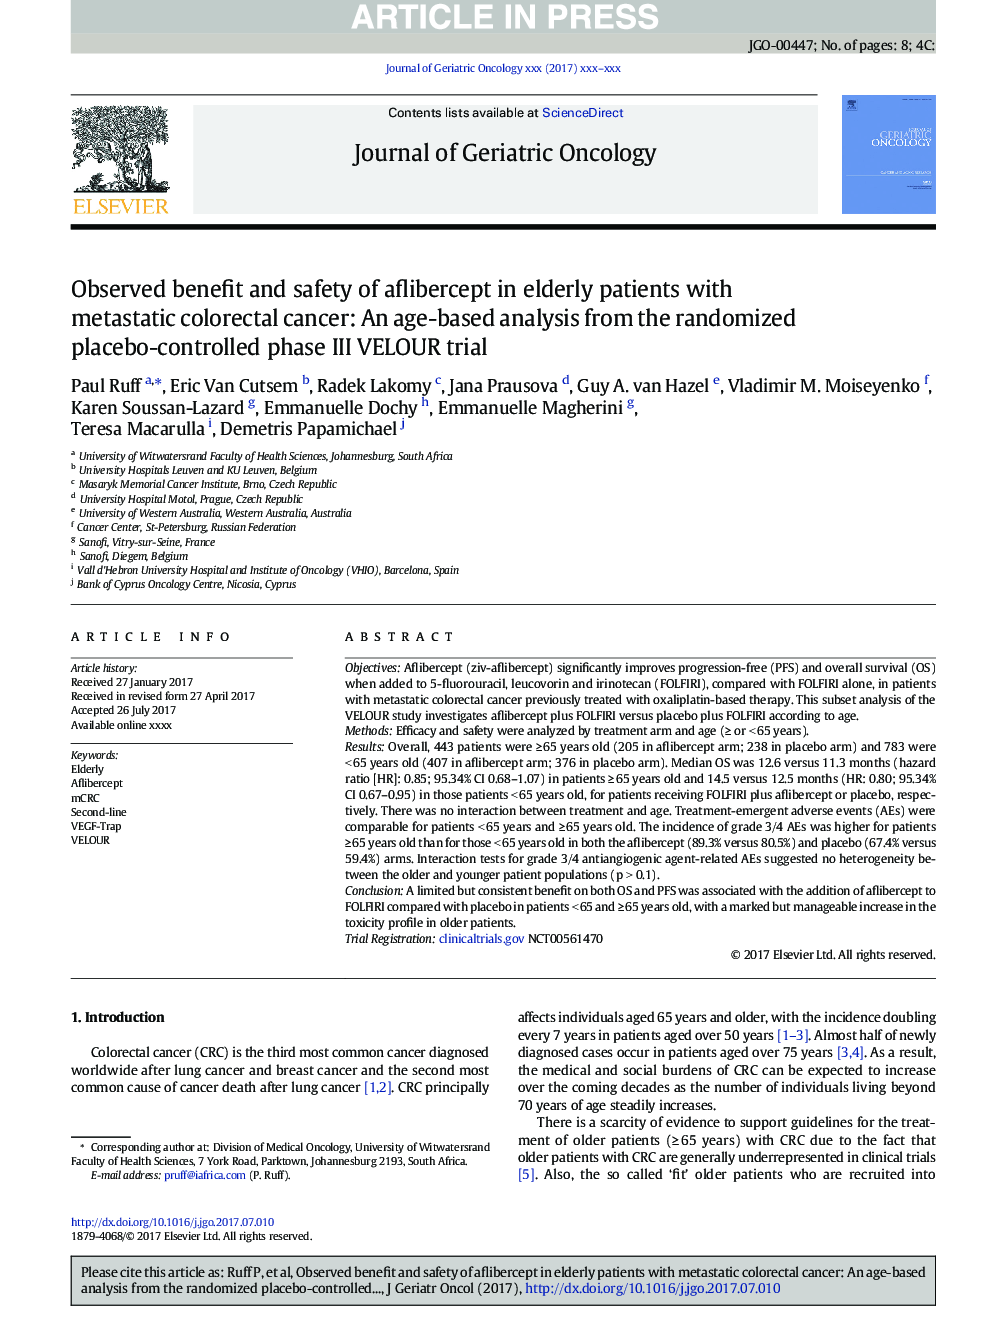 Observed benefit and safety of aflibercept in elderly patients with metastatic colorectal cancer: An age-based analysis from the randomized placebo-controlled phase III VELOUR trial